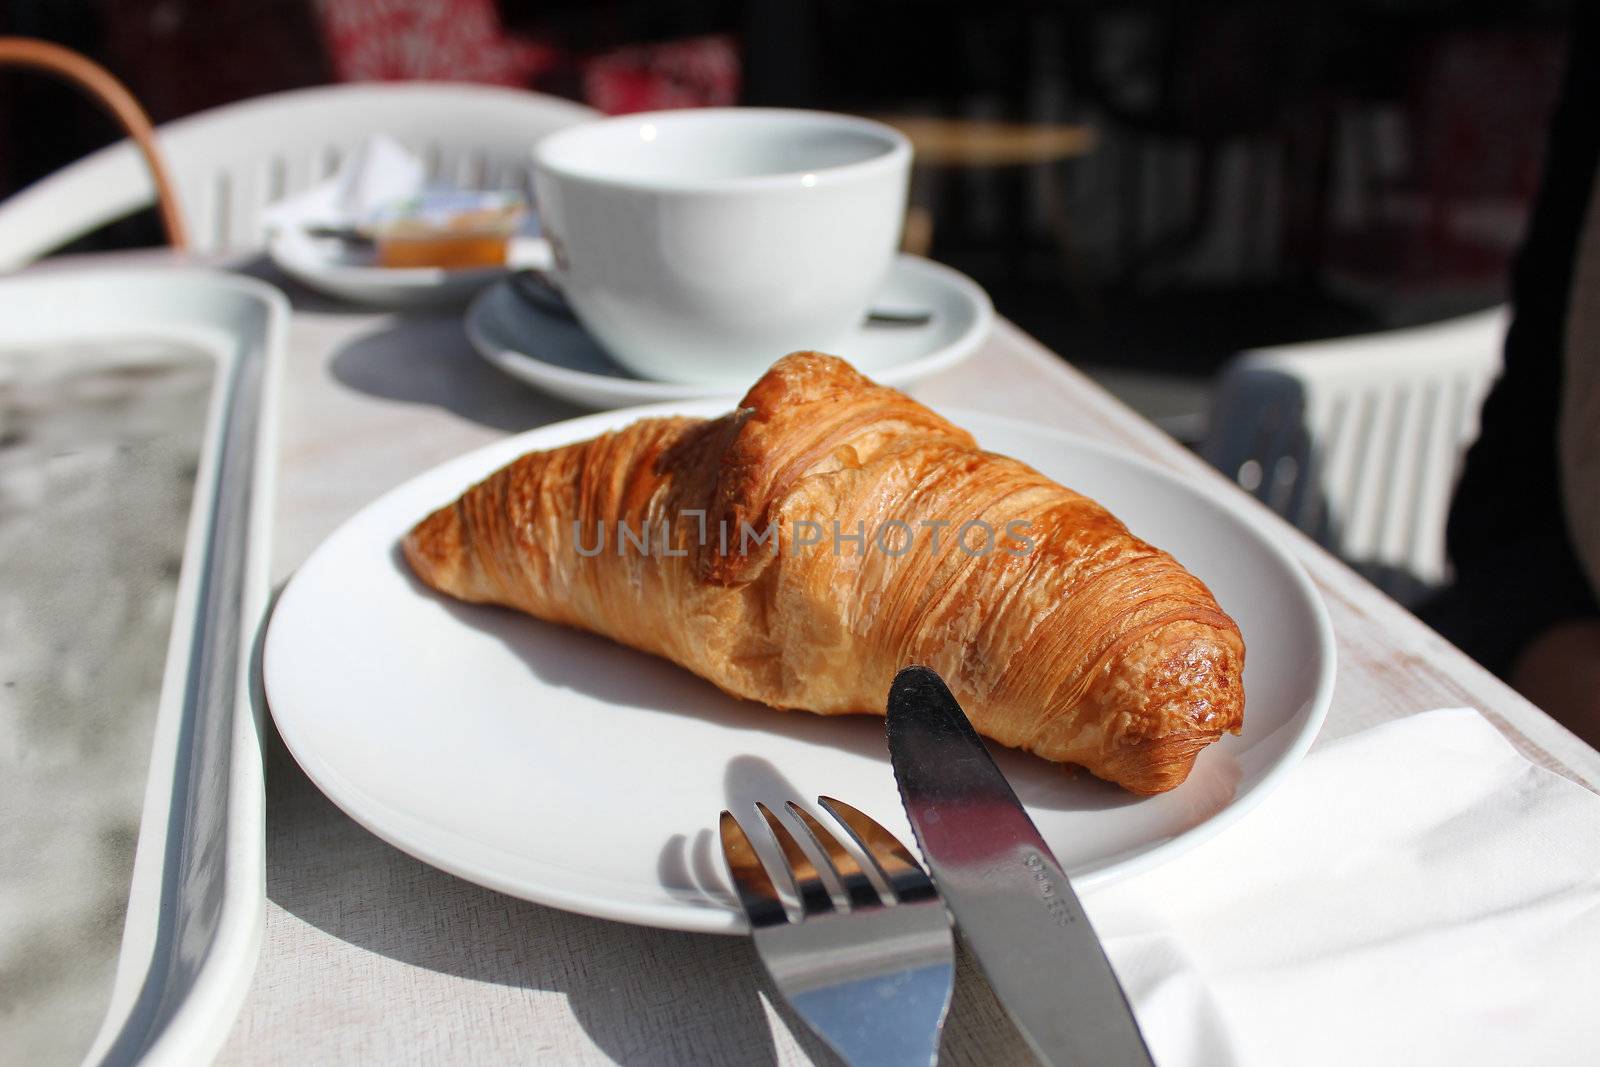 delicious croissant served for breakfast and coffee







delicious croissant